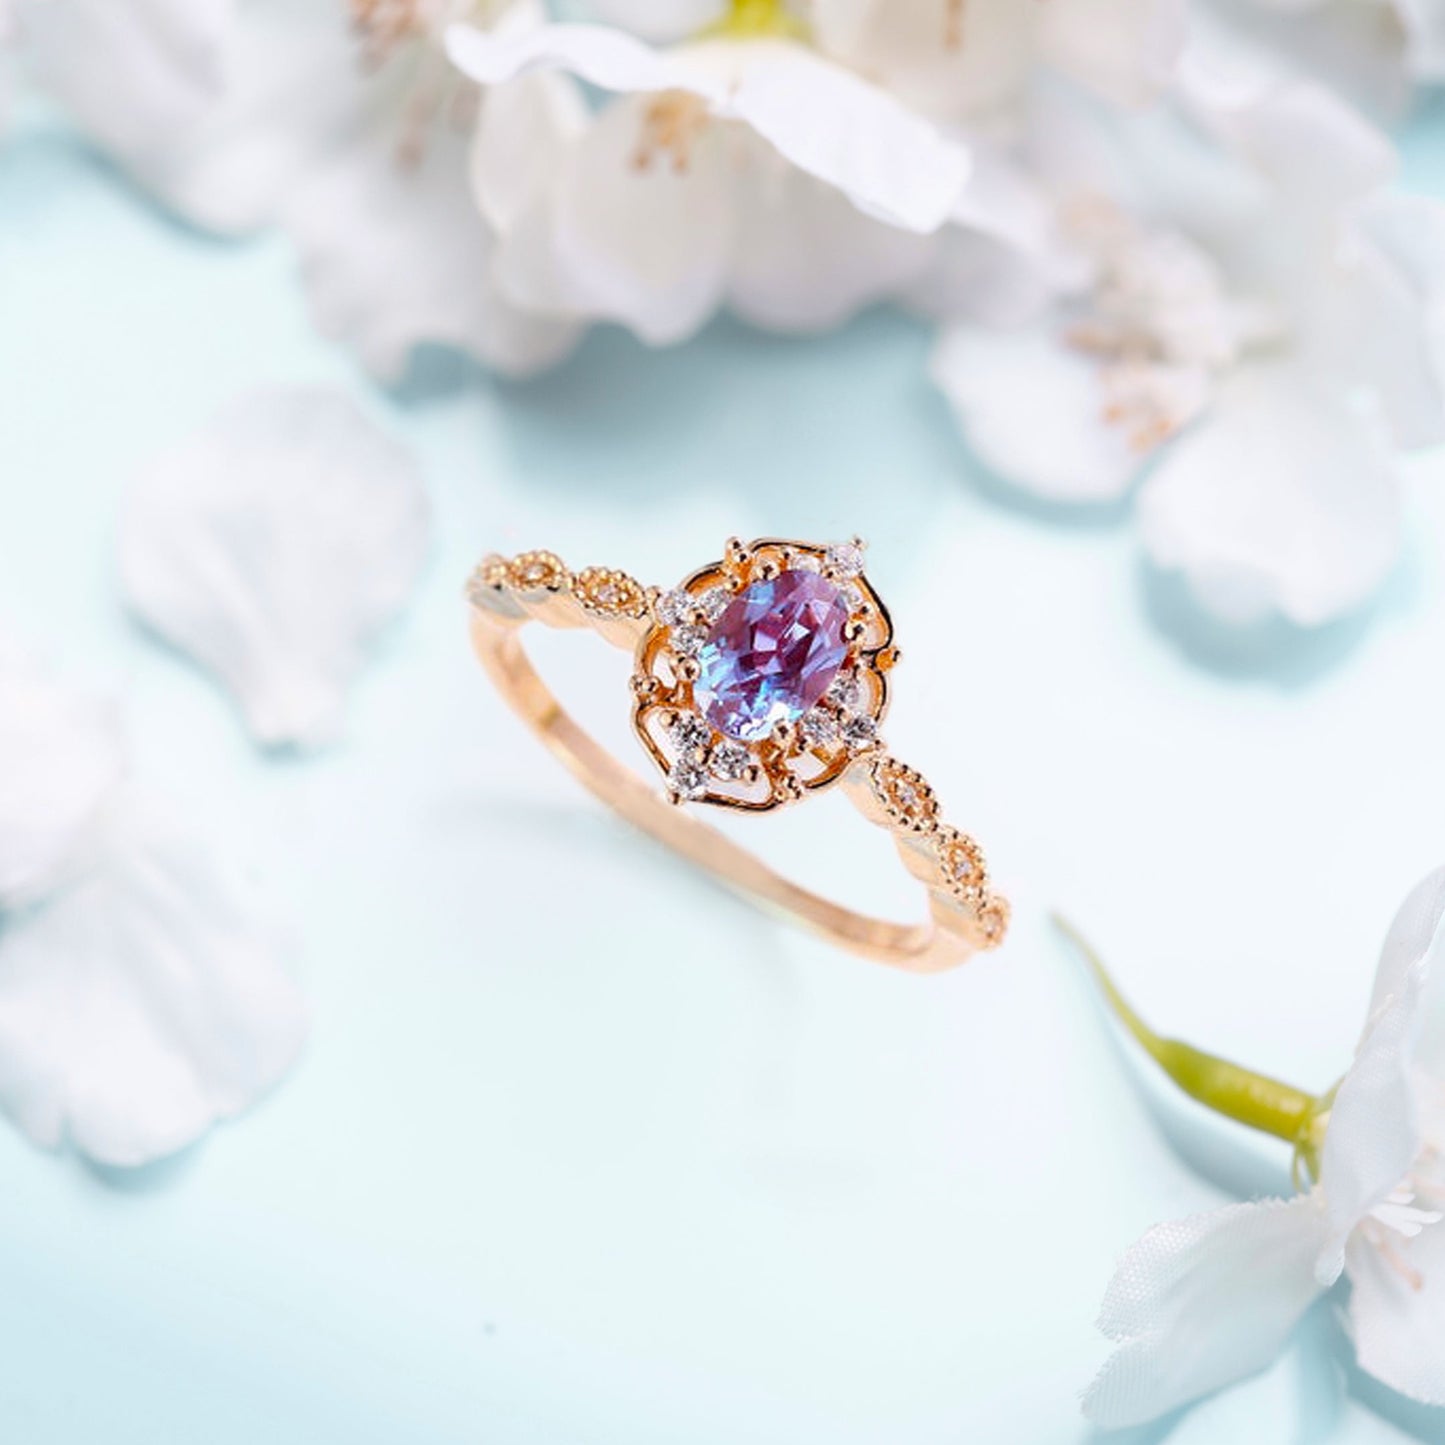 Zircon ring with an alexandrite stone with flowers on a background